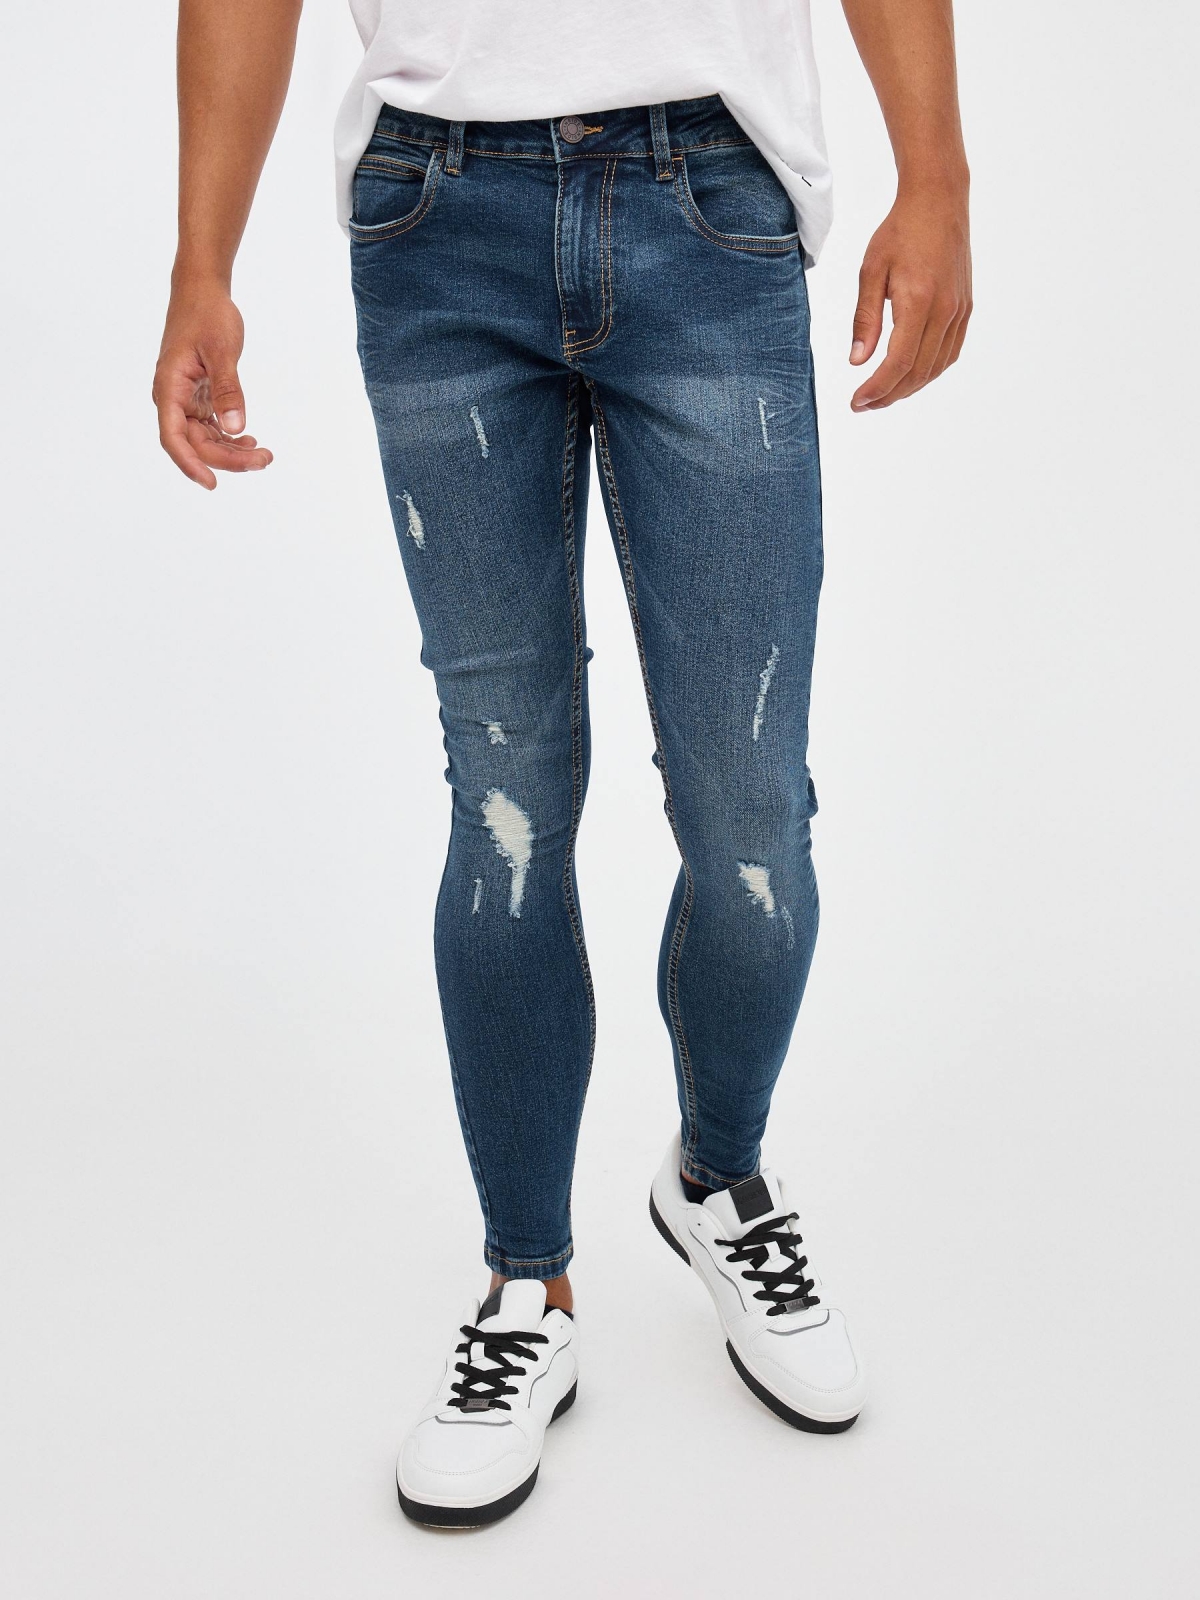 Men's superskinny jeans navy middle front view